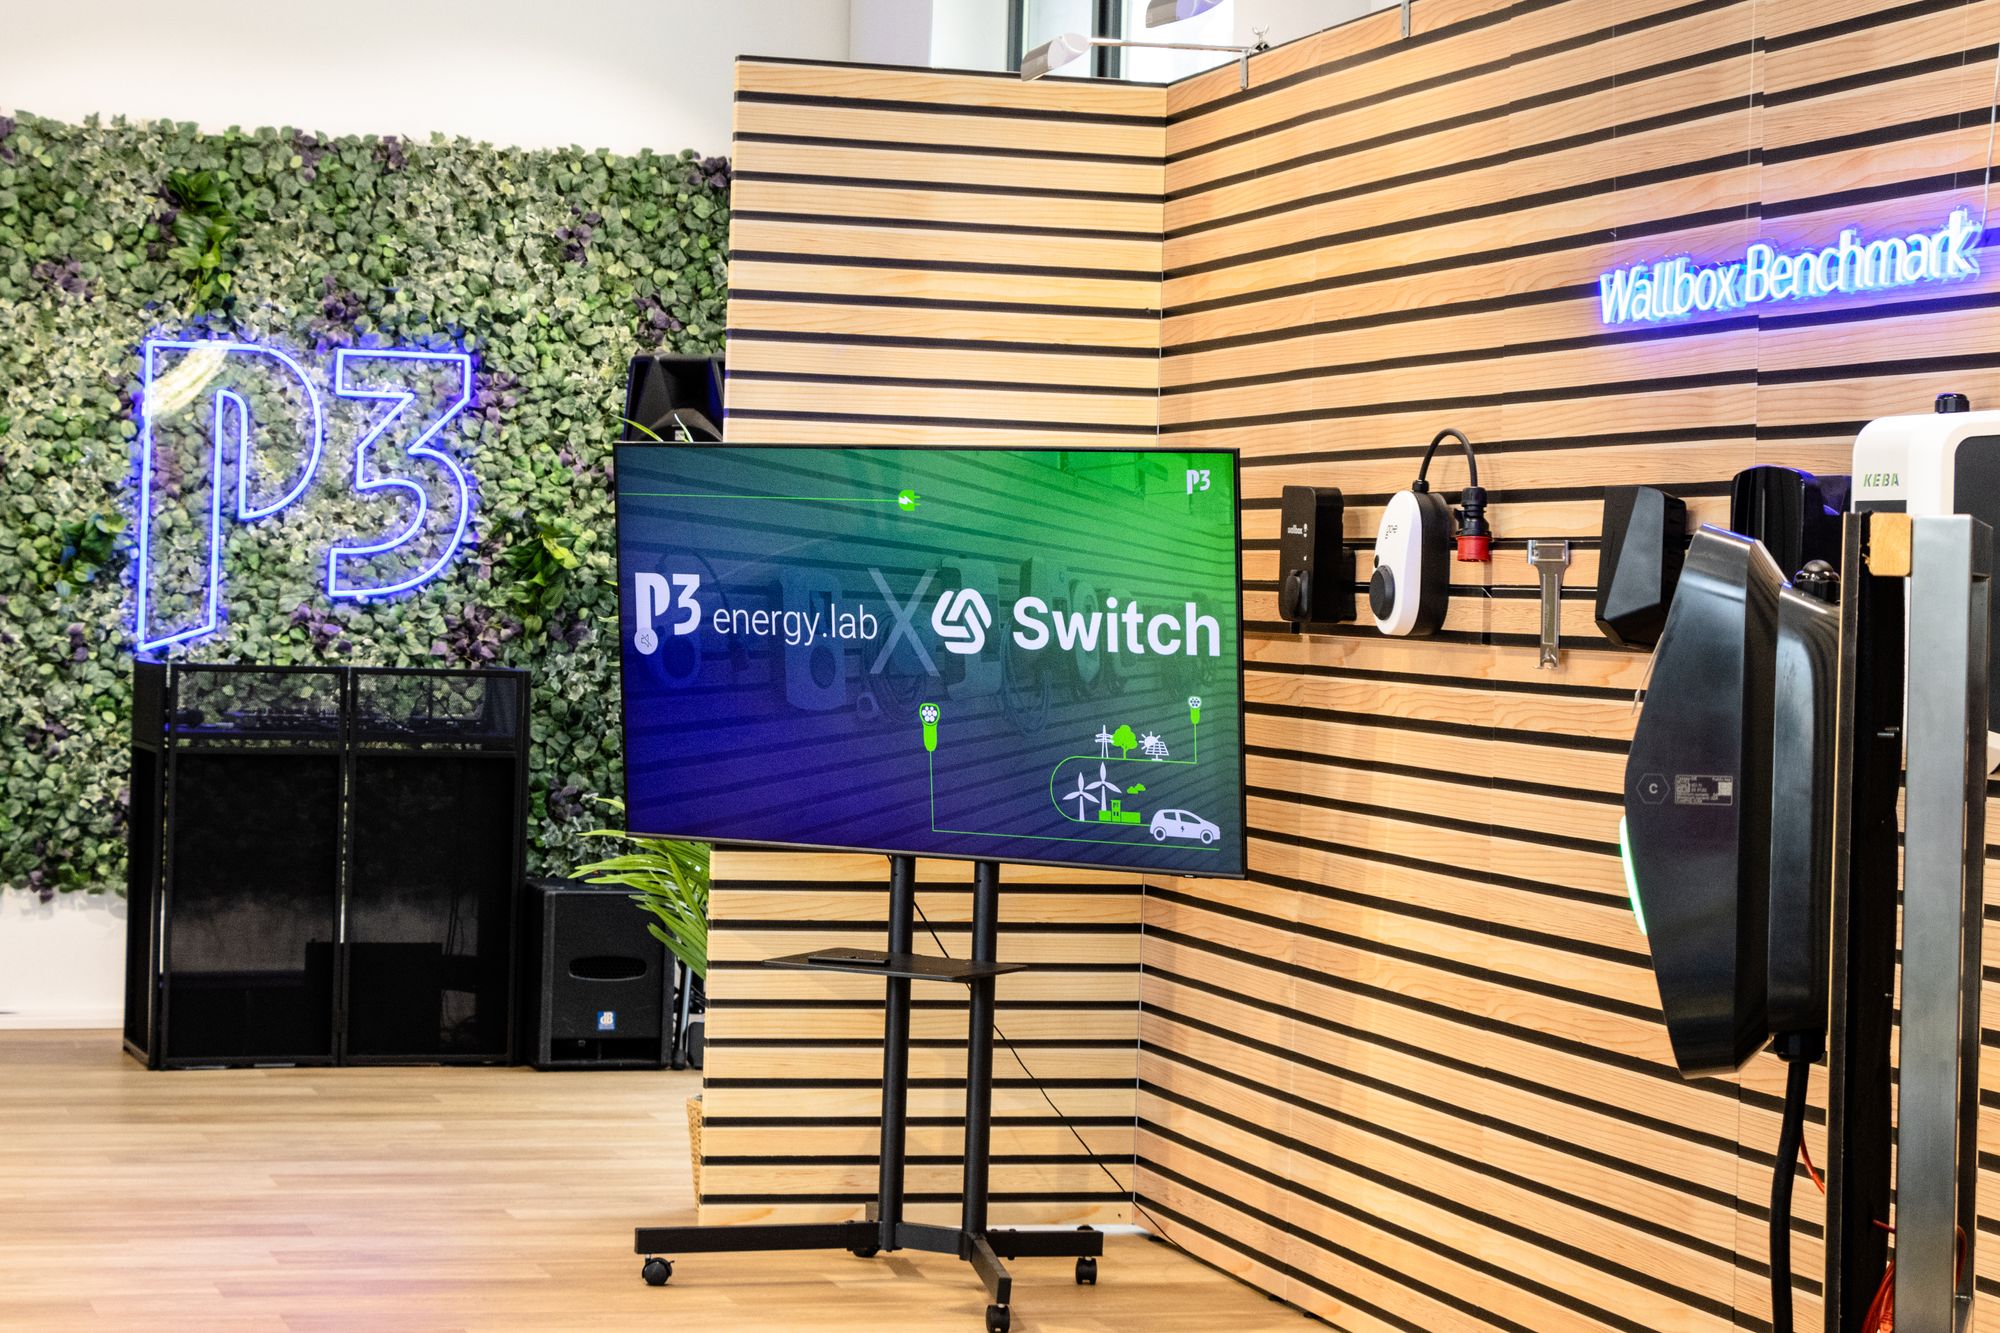 First of its kind: Switch and P3 Energy Lab unveil new test environment for green mobility innovation